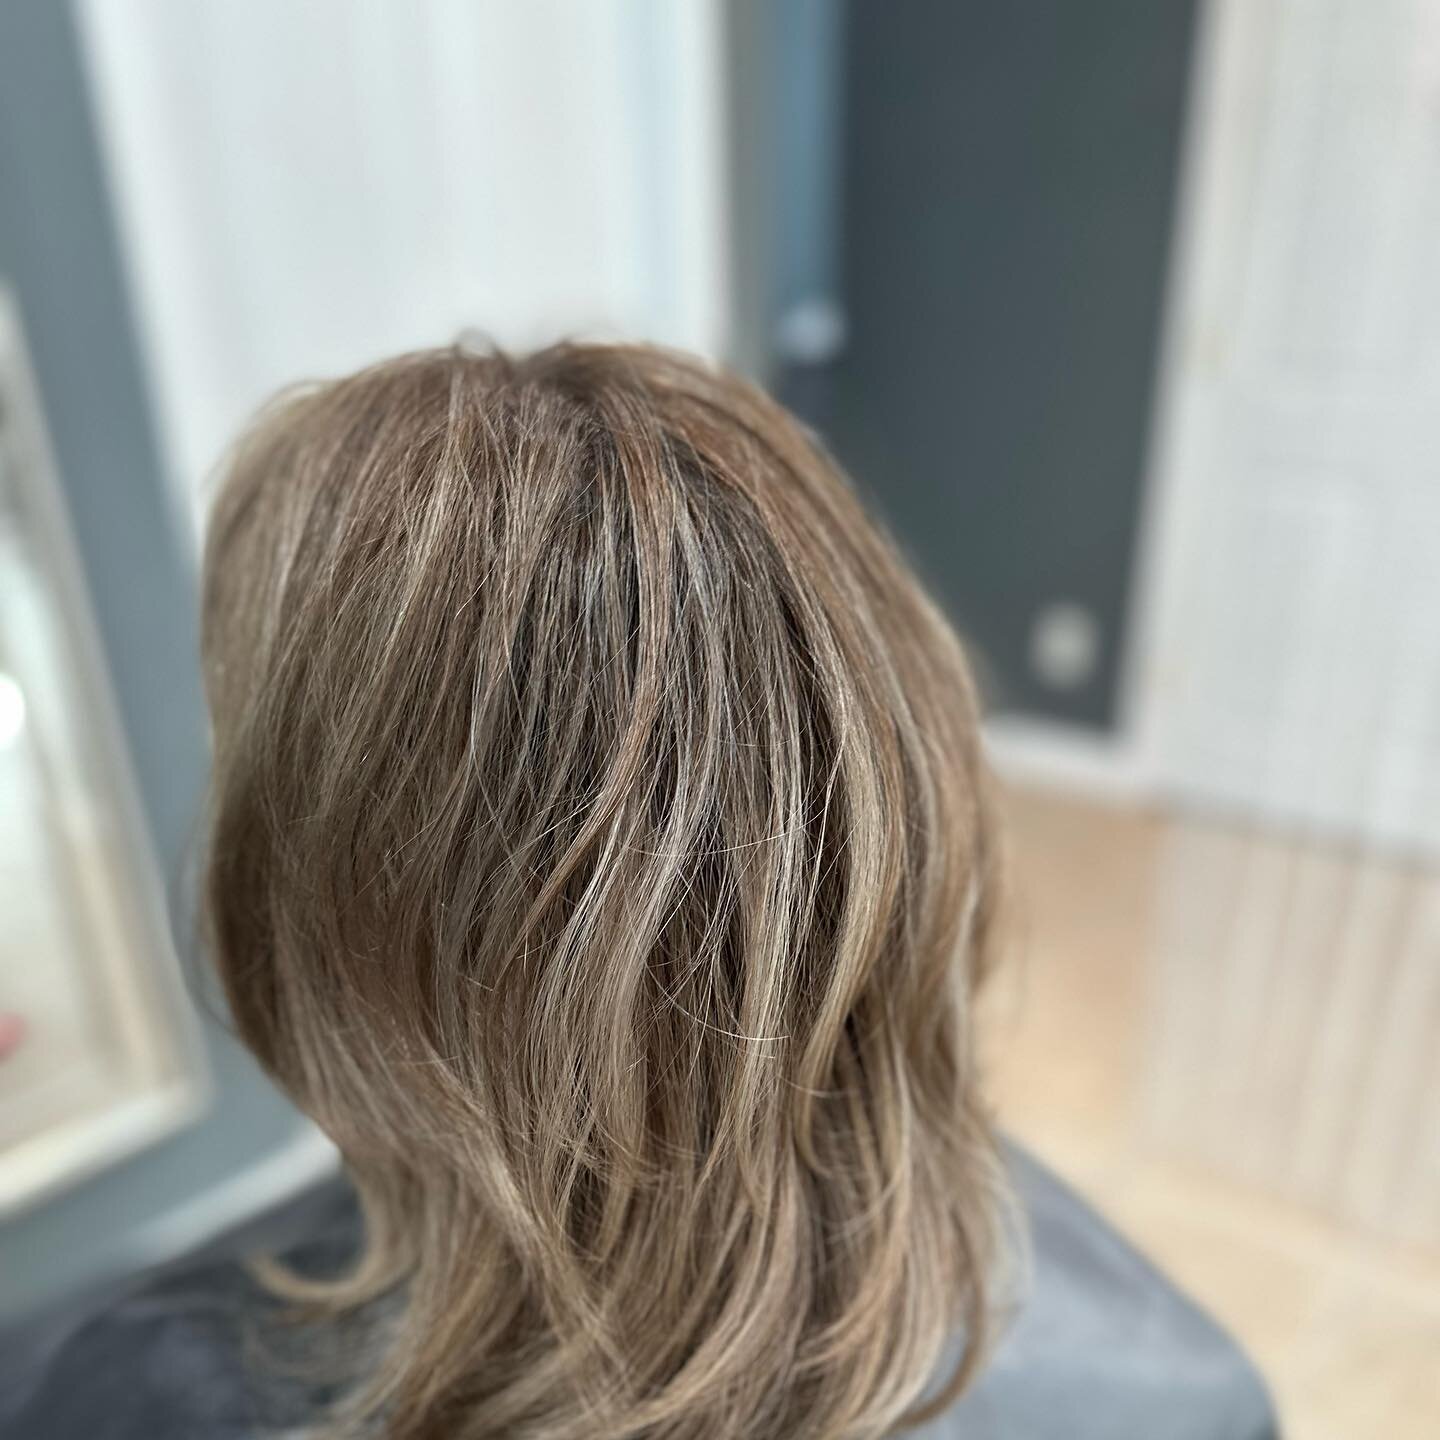 This client wasn&rsquo;t happy from previous hair color she wanted natural blond and professional look. 
#blonde #natural #roundrocktx #austinhairstylist #colorcorection 💕